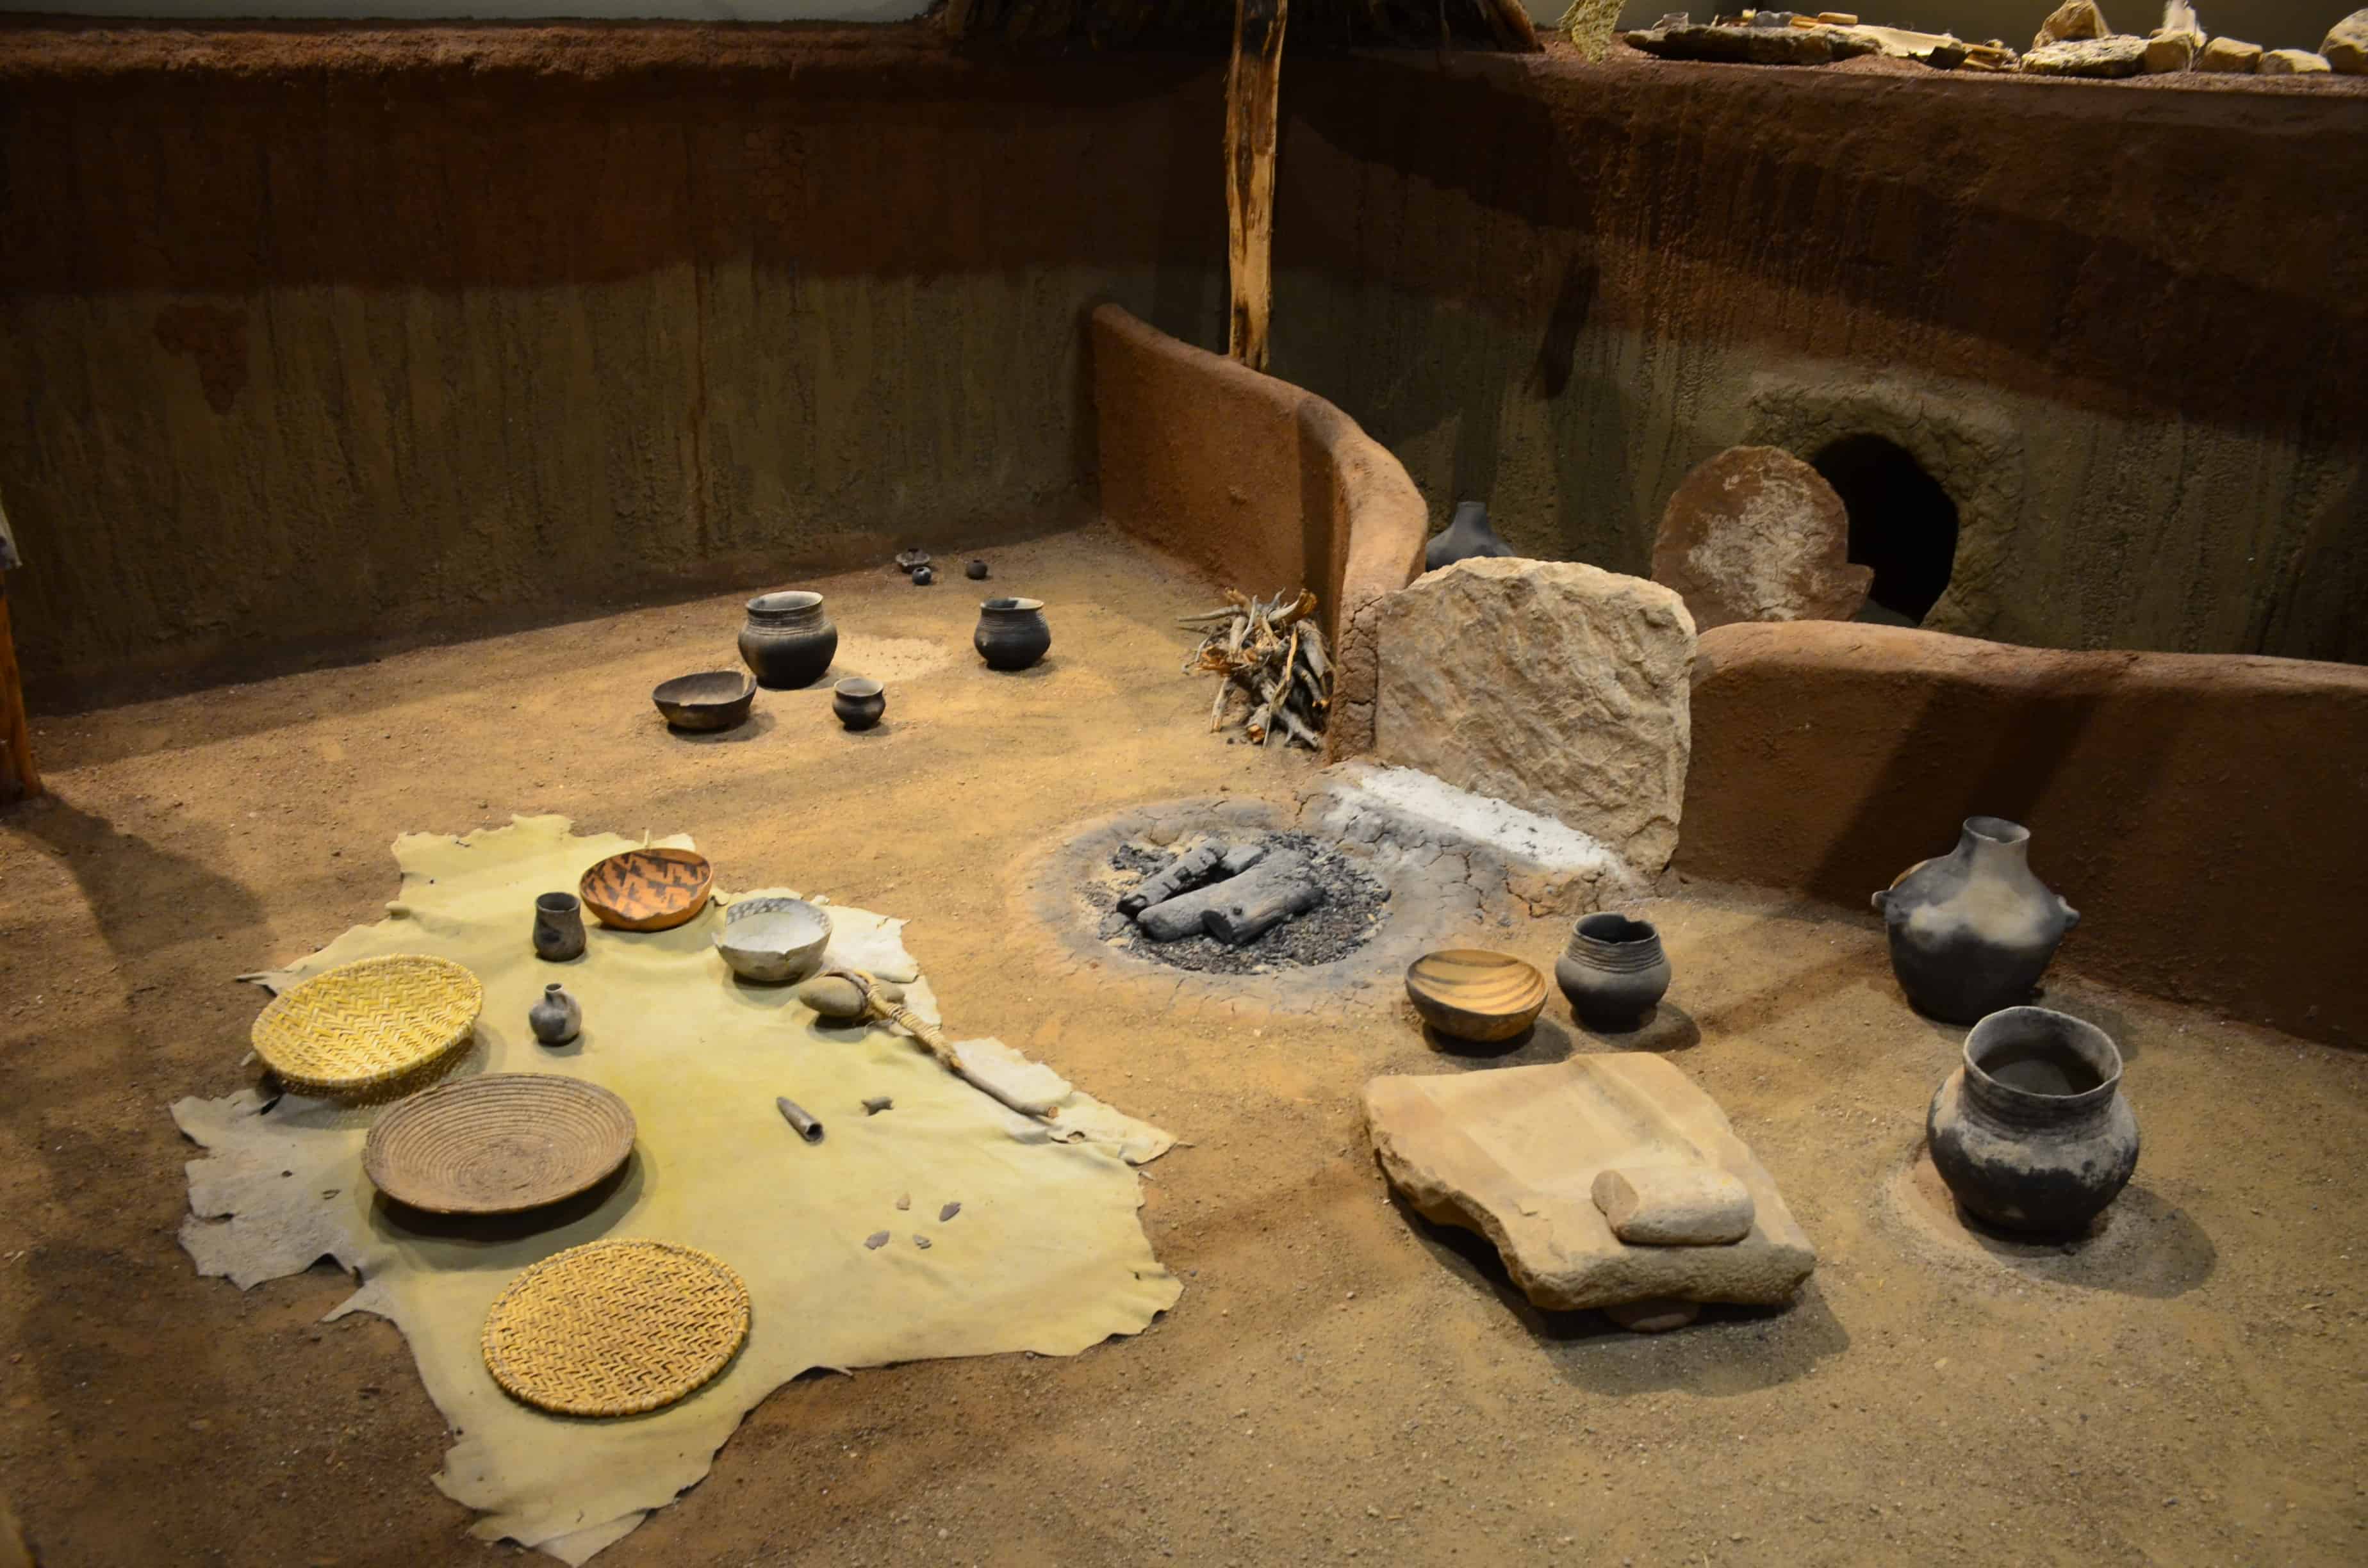 Pithouse at Canyons of the Ancients Visitor Center and Museum at Canyons of the Ancients National Monument in Colorado